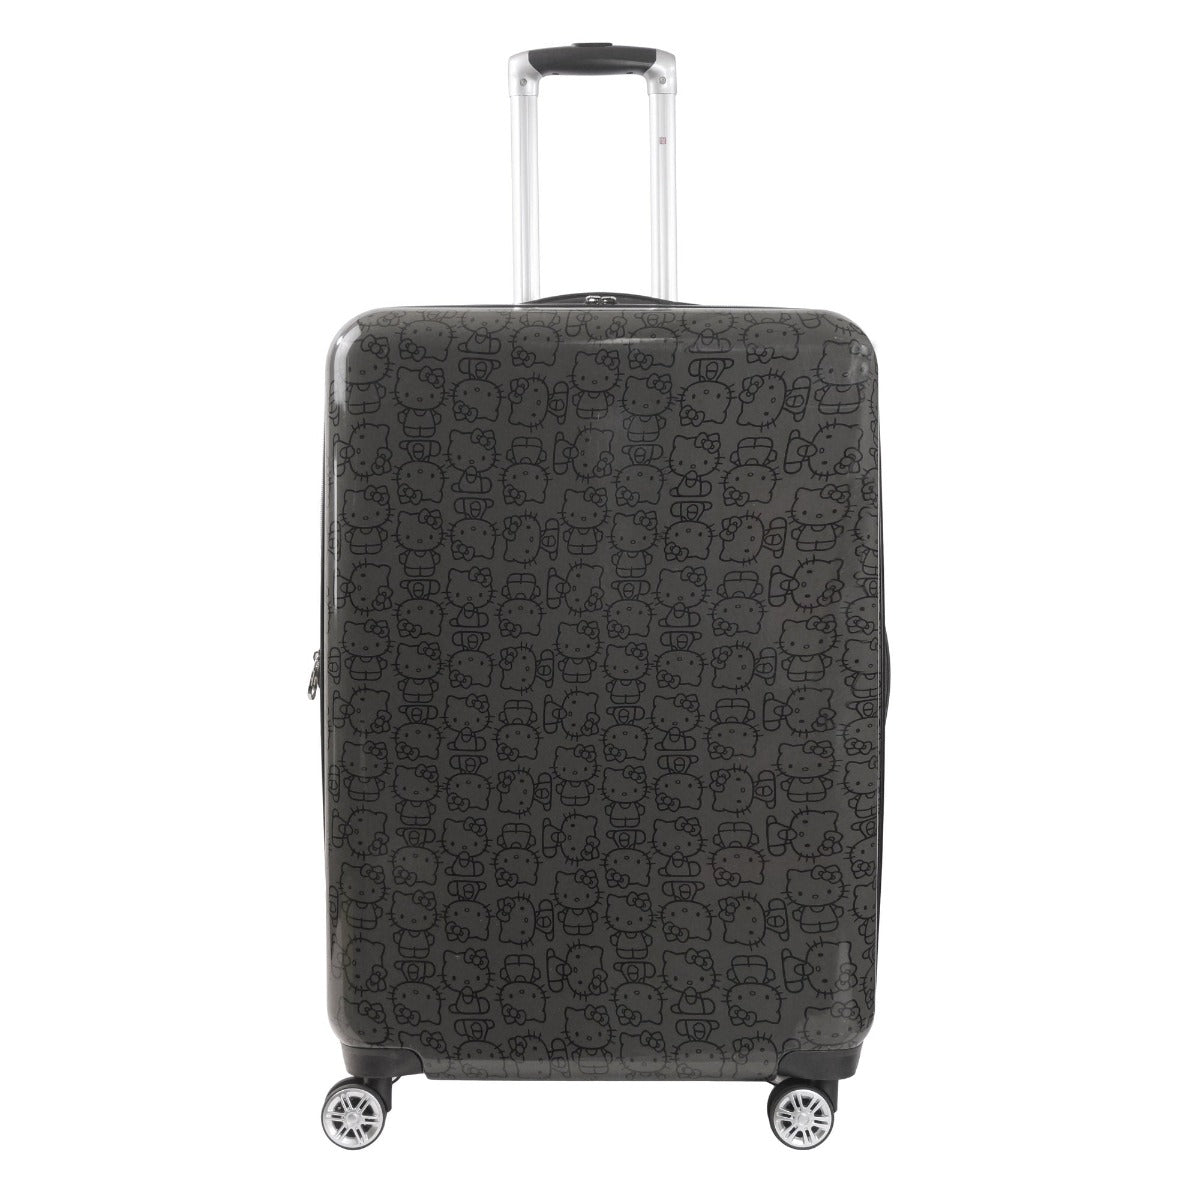 Hello Kitty Pose All Over Print 29.5 inch Hardsided Luggage Black checked spinner suitcase